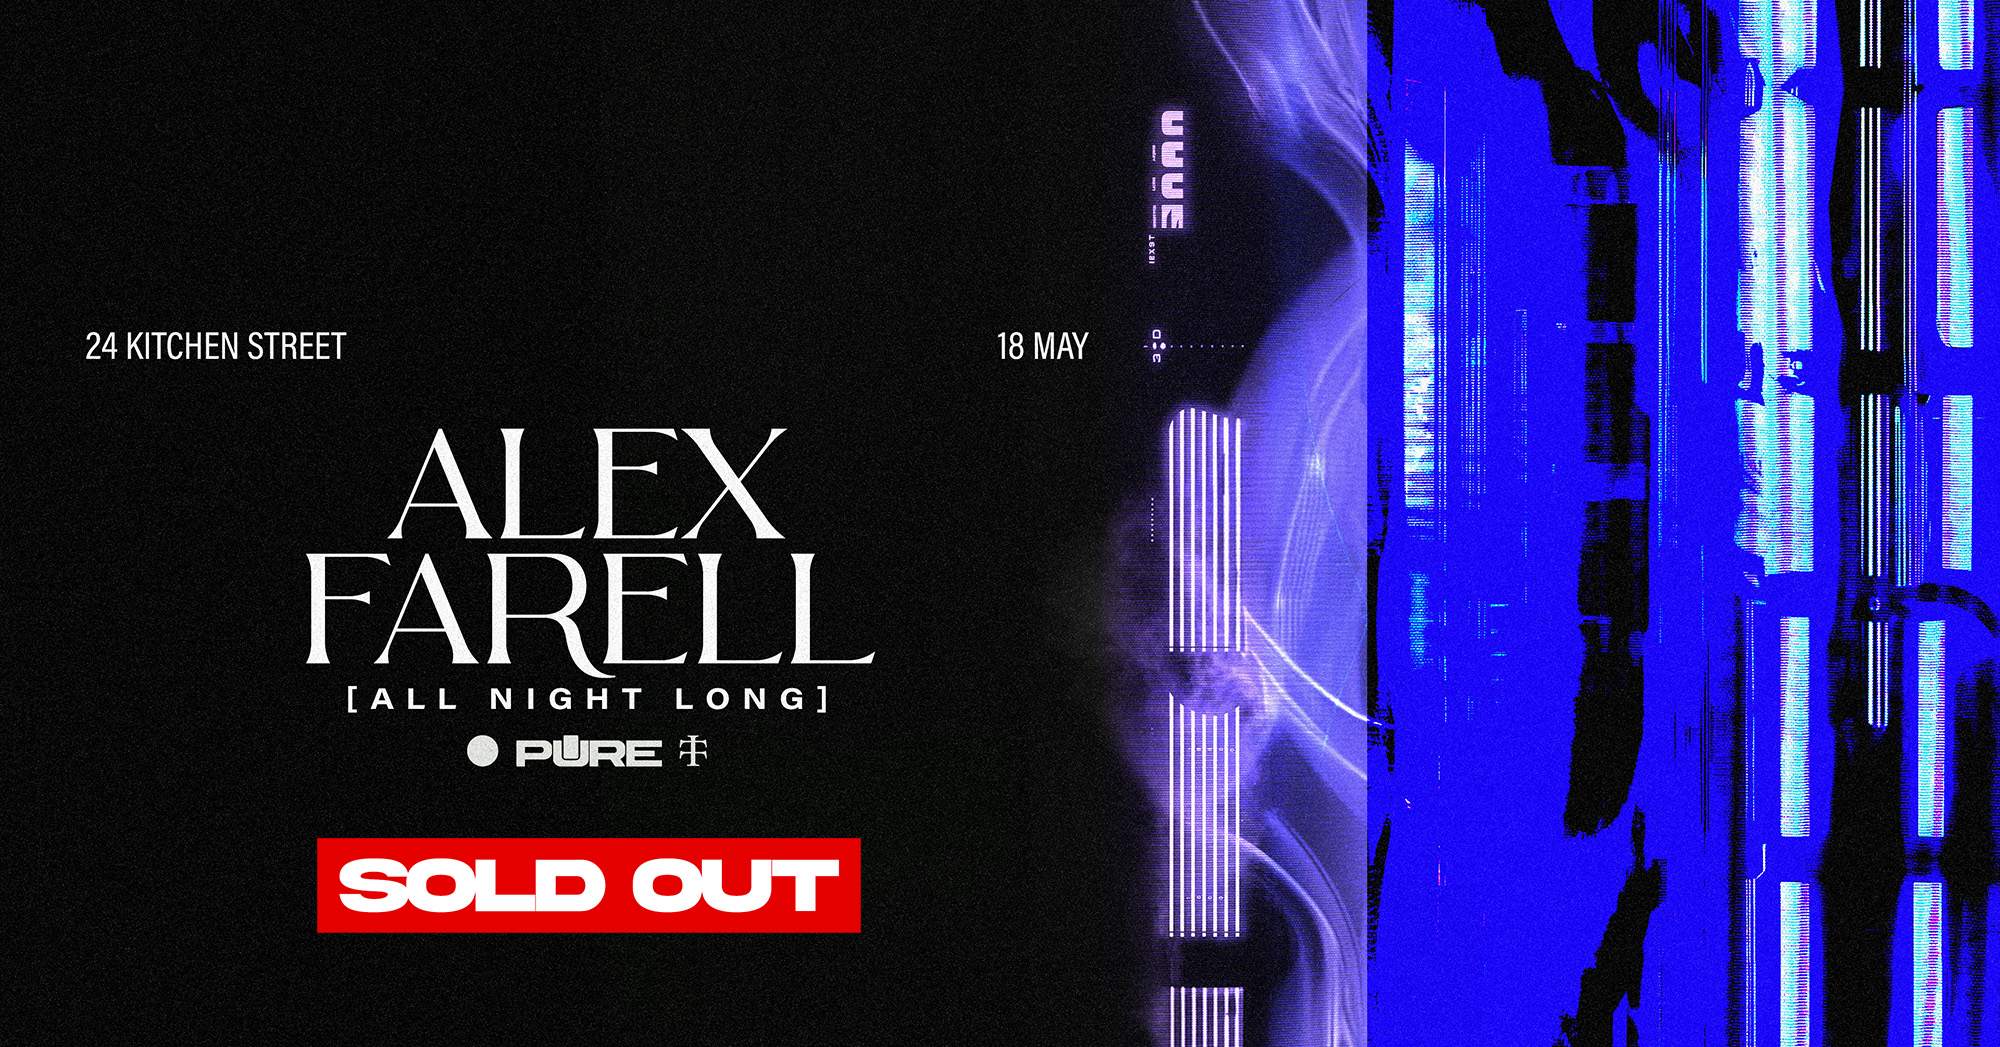 Alex Farell [All Night long] SOLD OUT - Página frontal